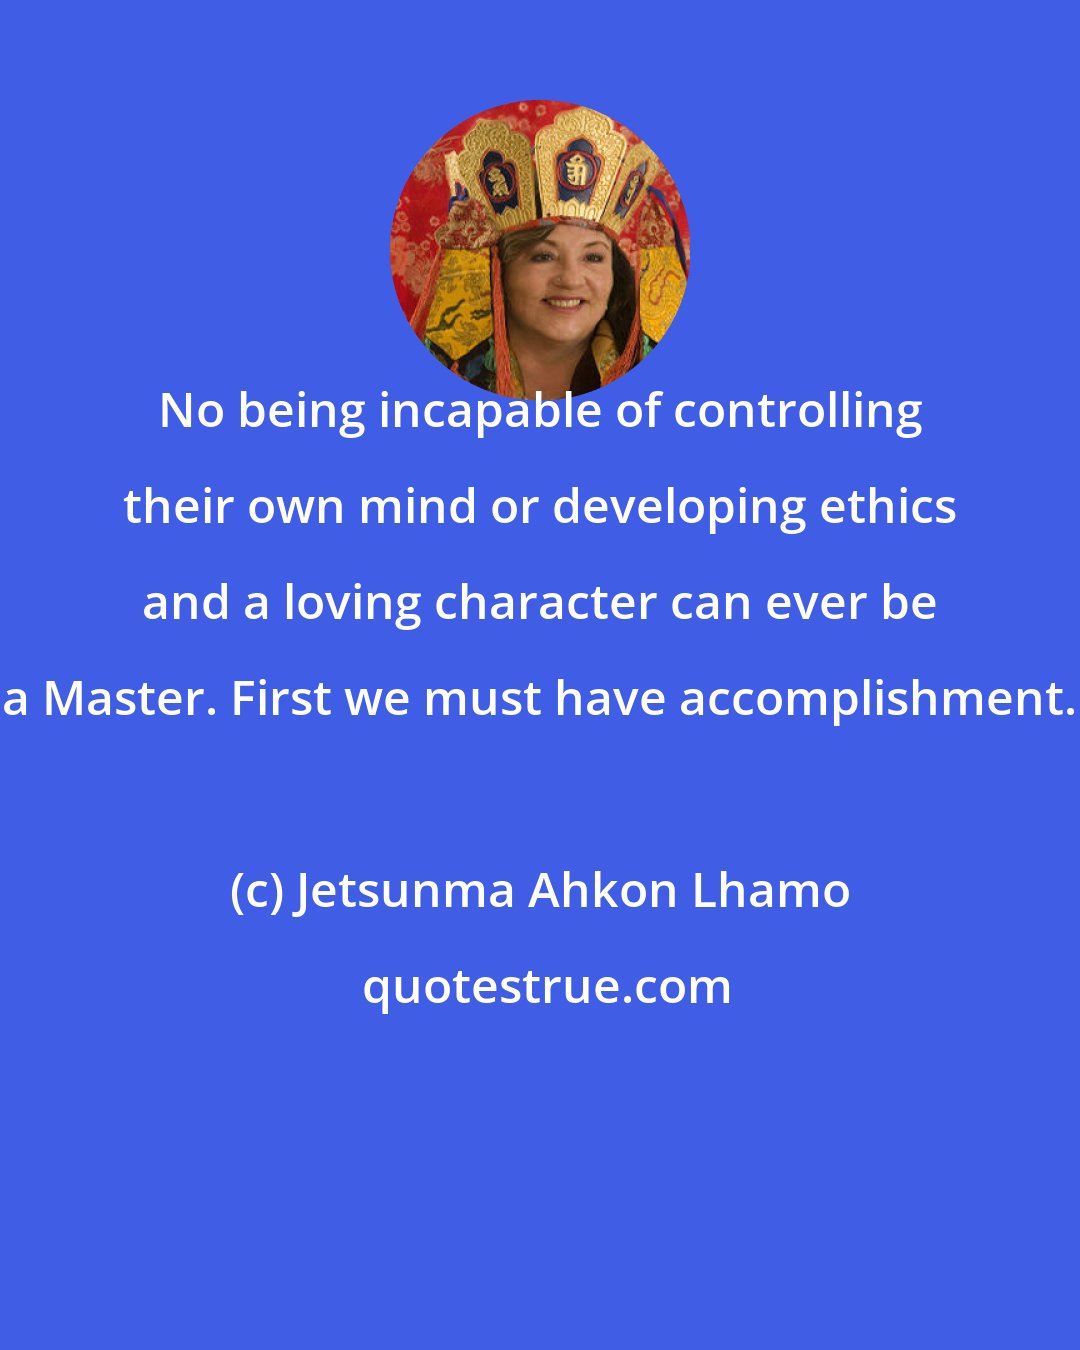 Jetsunma Ahkon Lhamo: No being incapable of controlling their own mind or developing ethics and a loving character can ever be a Master. First we must have accomplishment.